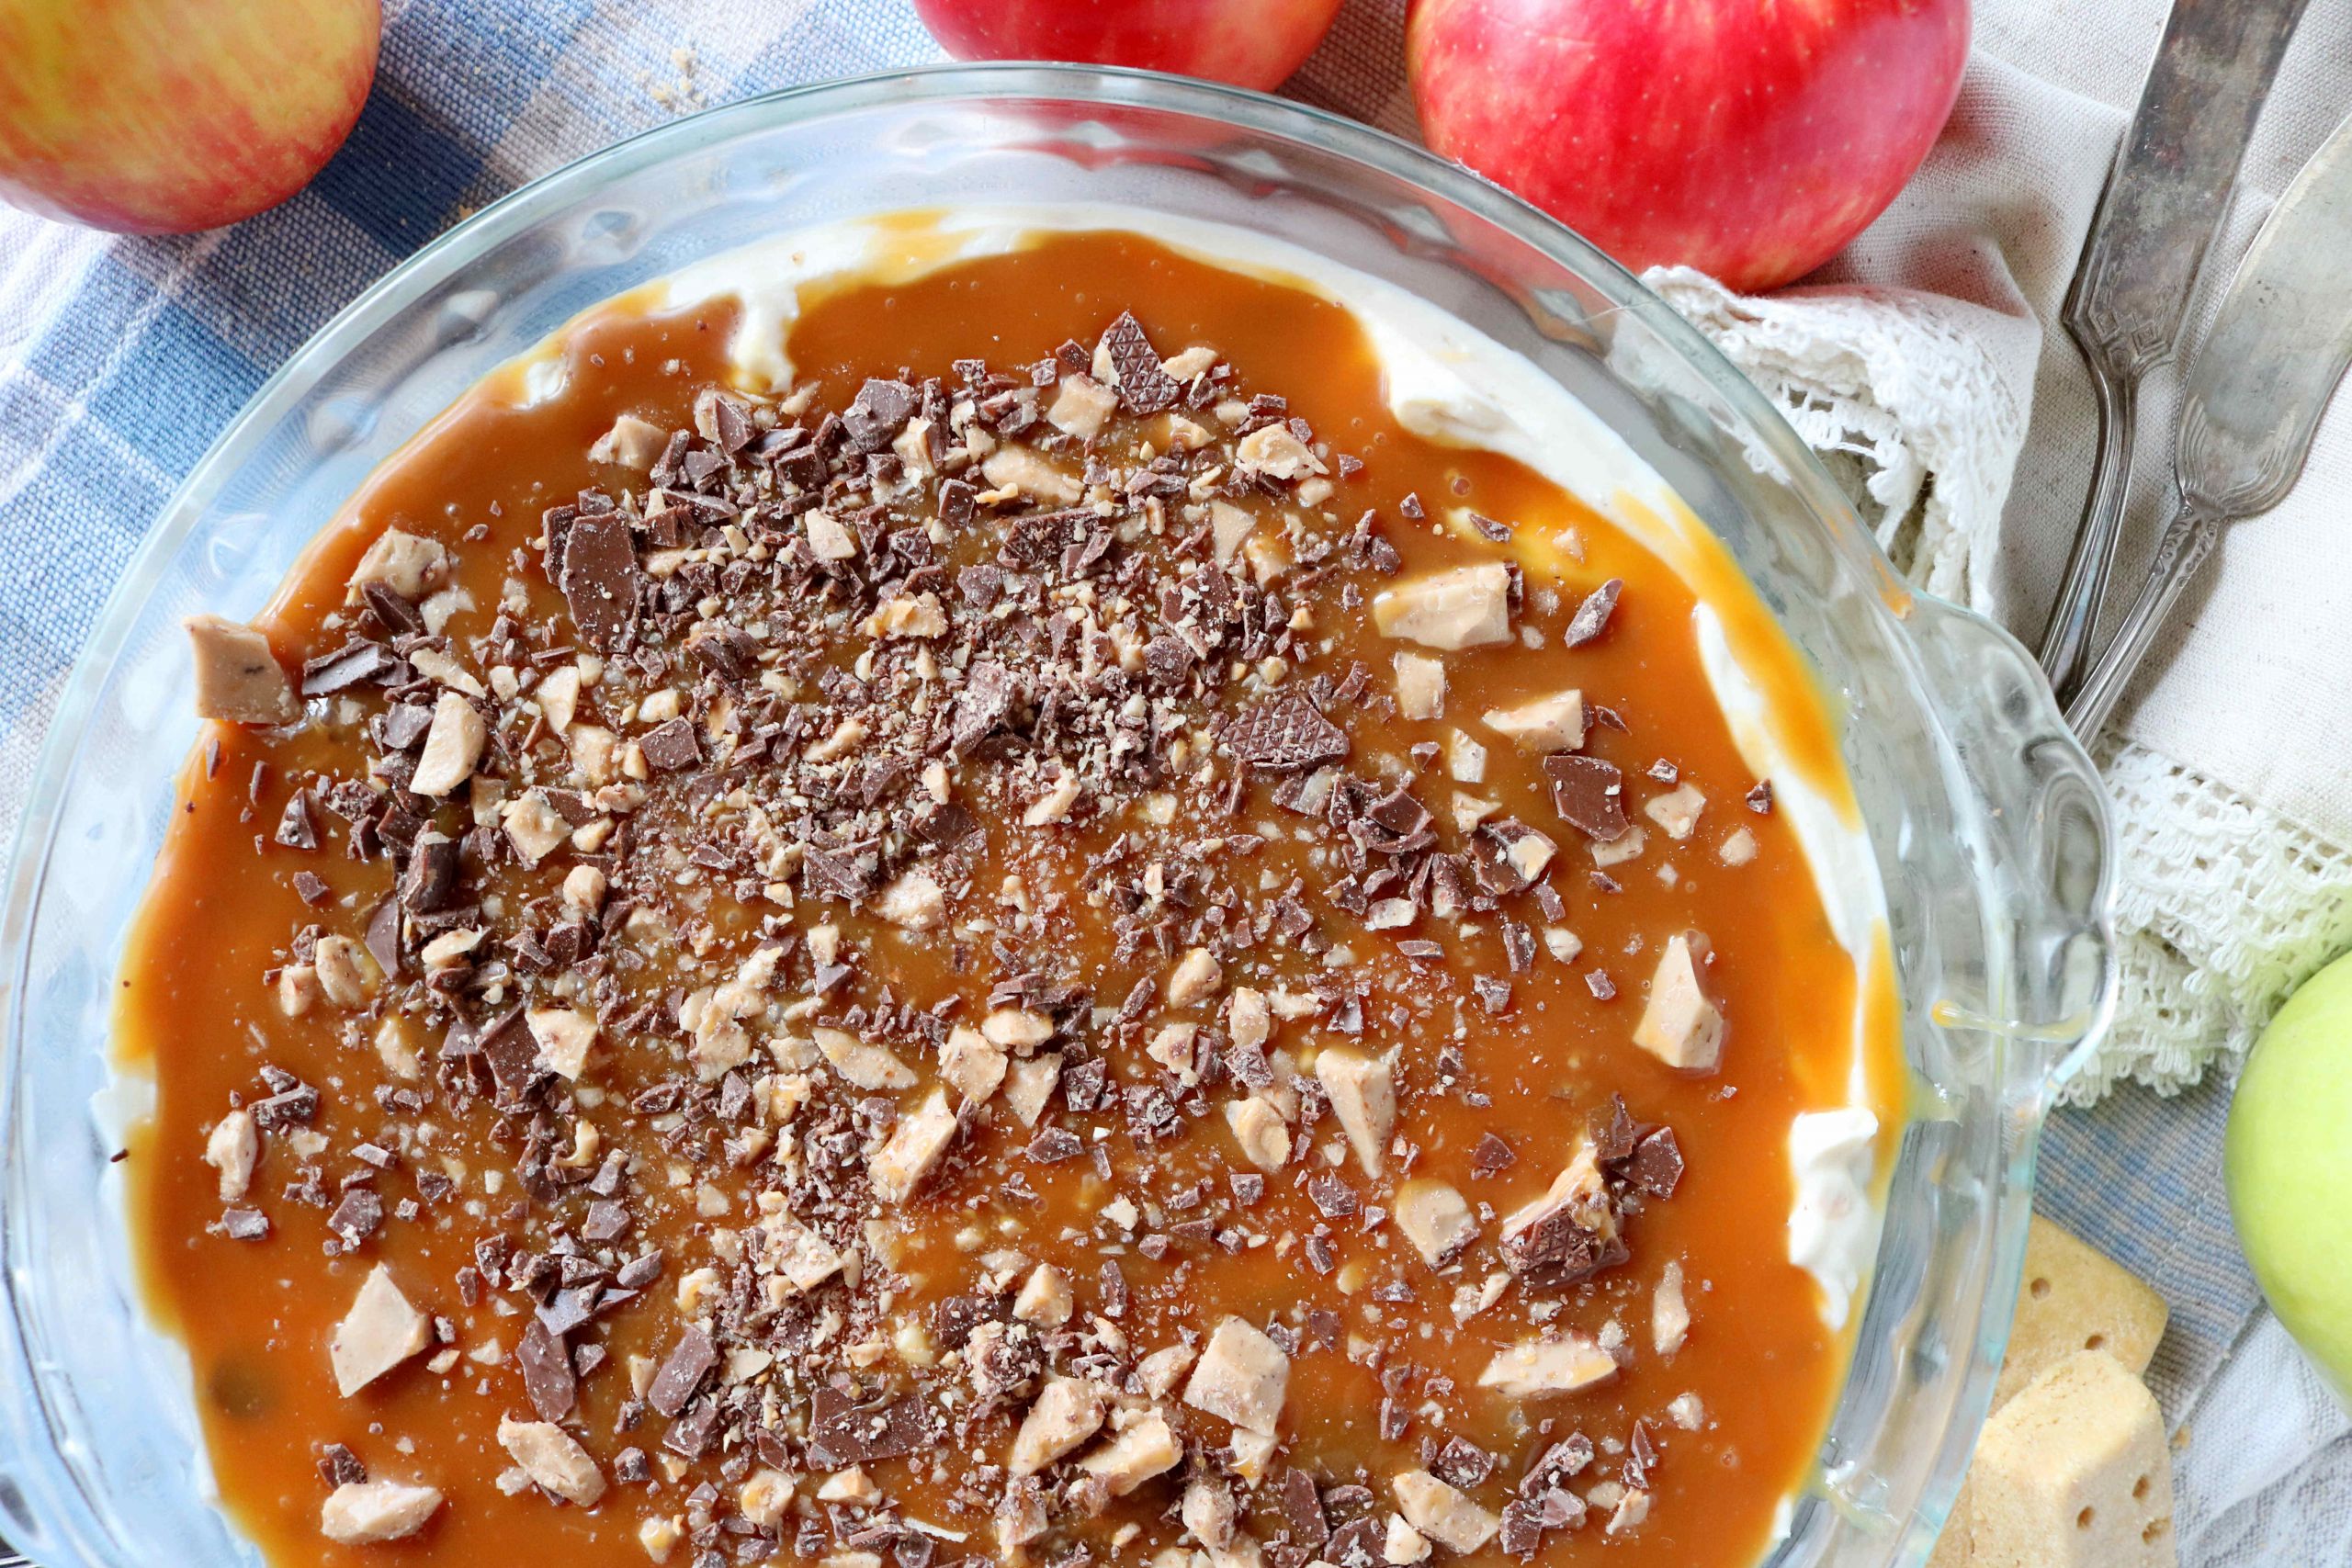 Caramel For Dipping Apples
 10 Minute Caramel Apple Dip The Anthony Kitchen